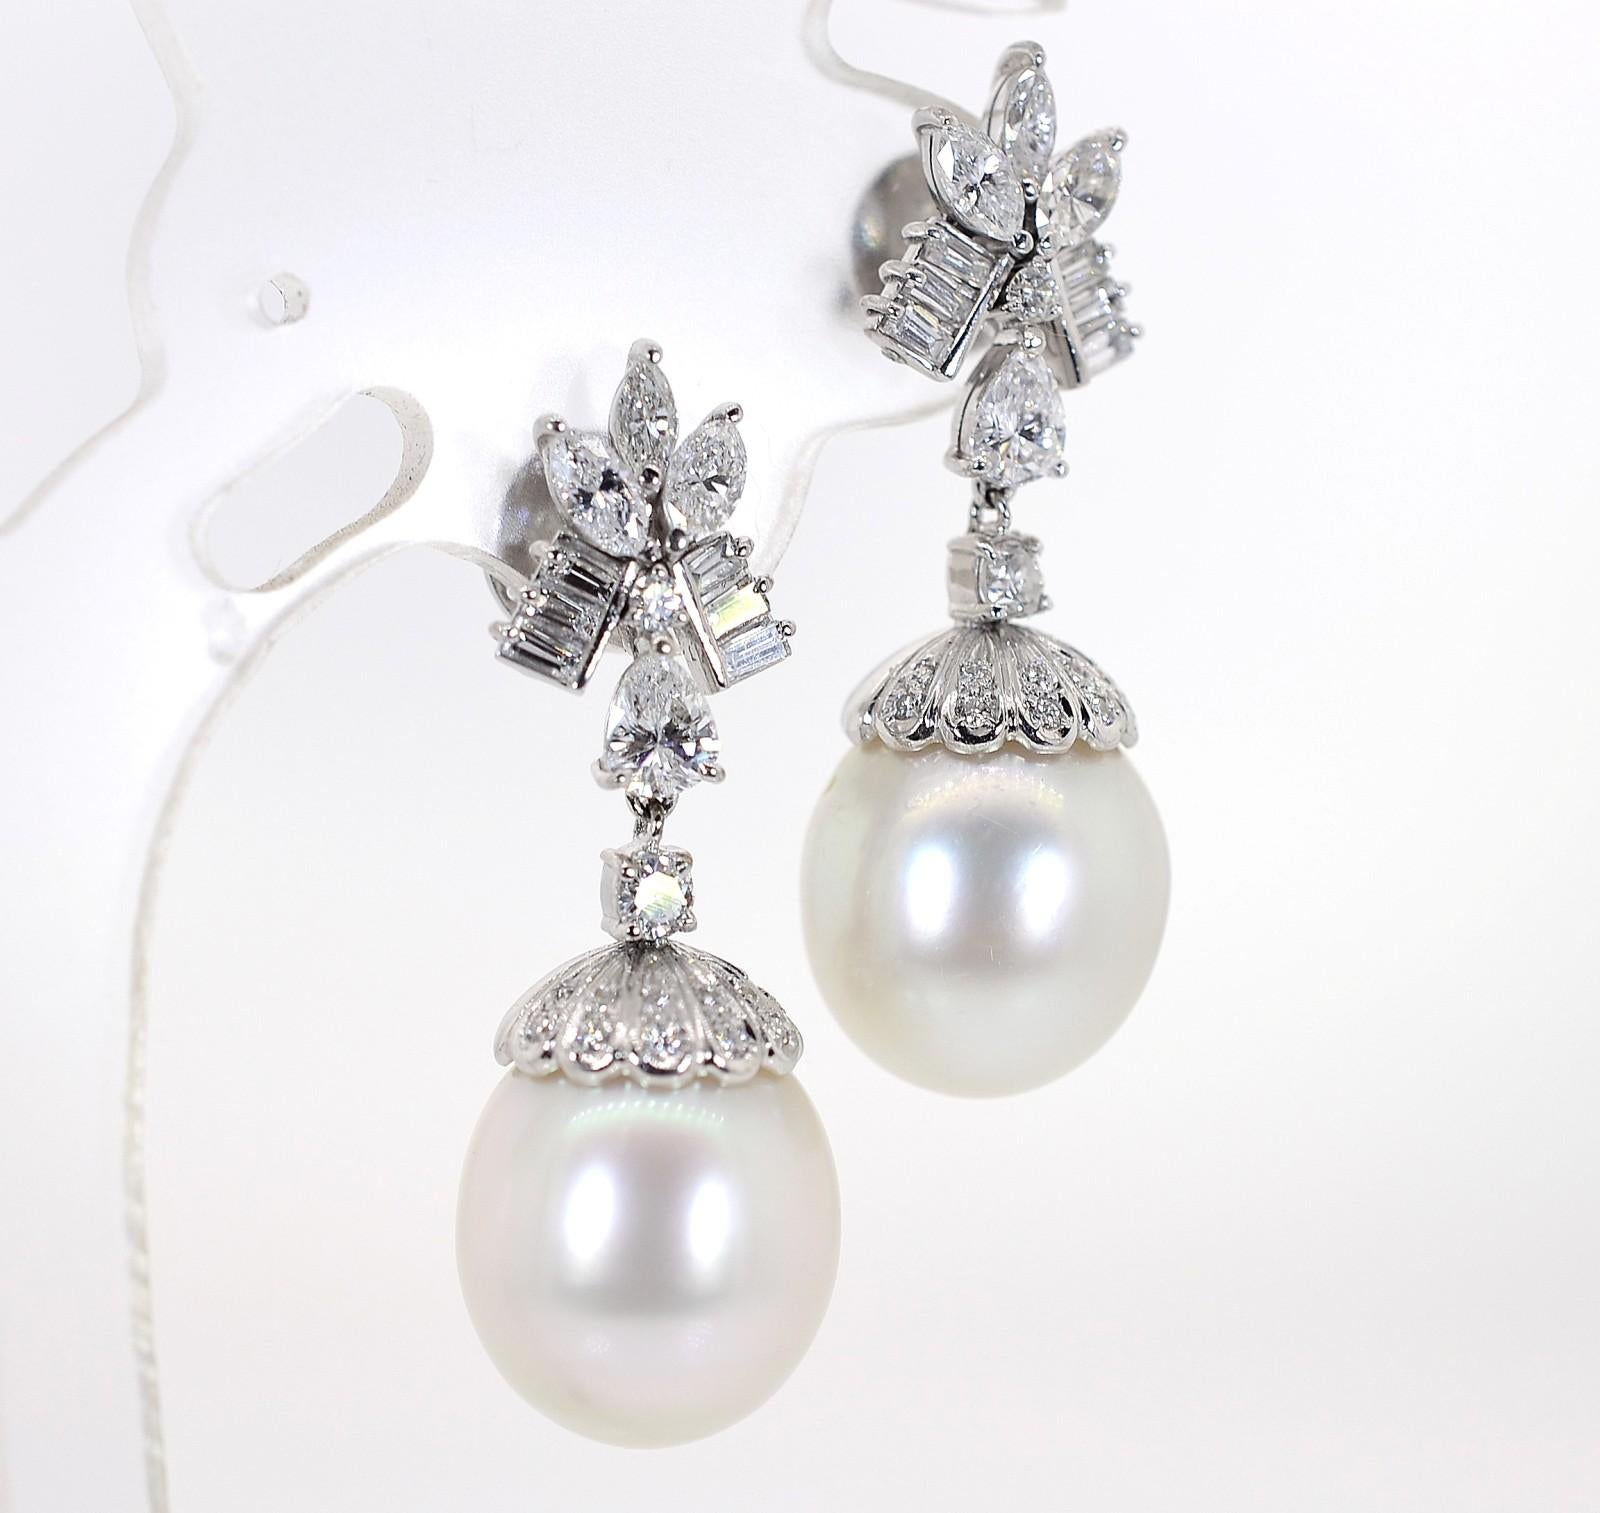 These are the quintessential 1960s Pearl and Diamond earrings. Created in 18KT white gold dangling 2 Baroque Pearls, these pretties have a white creamy undertone and measure 12.50 mm x 14.50 mm. Adorning the top cups are 2.00 carat of shimmering